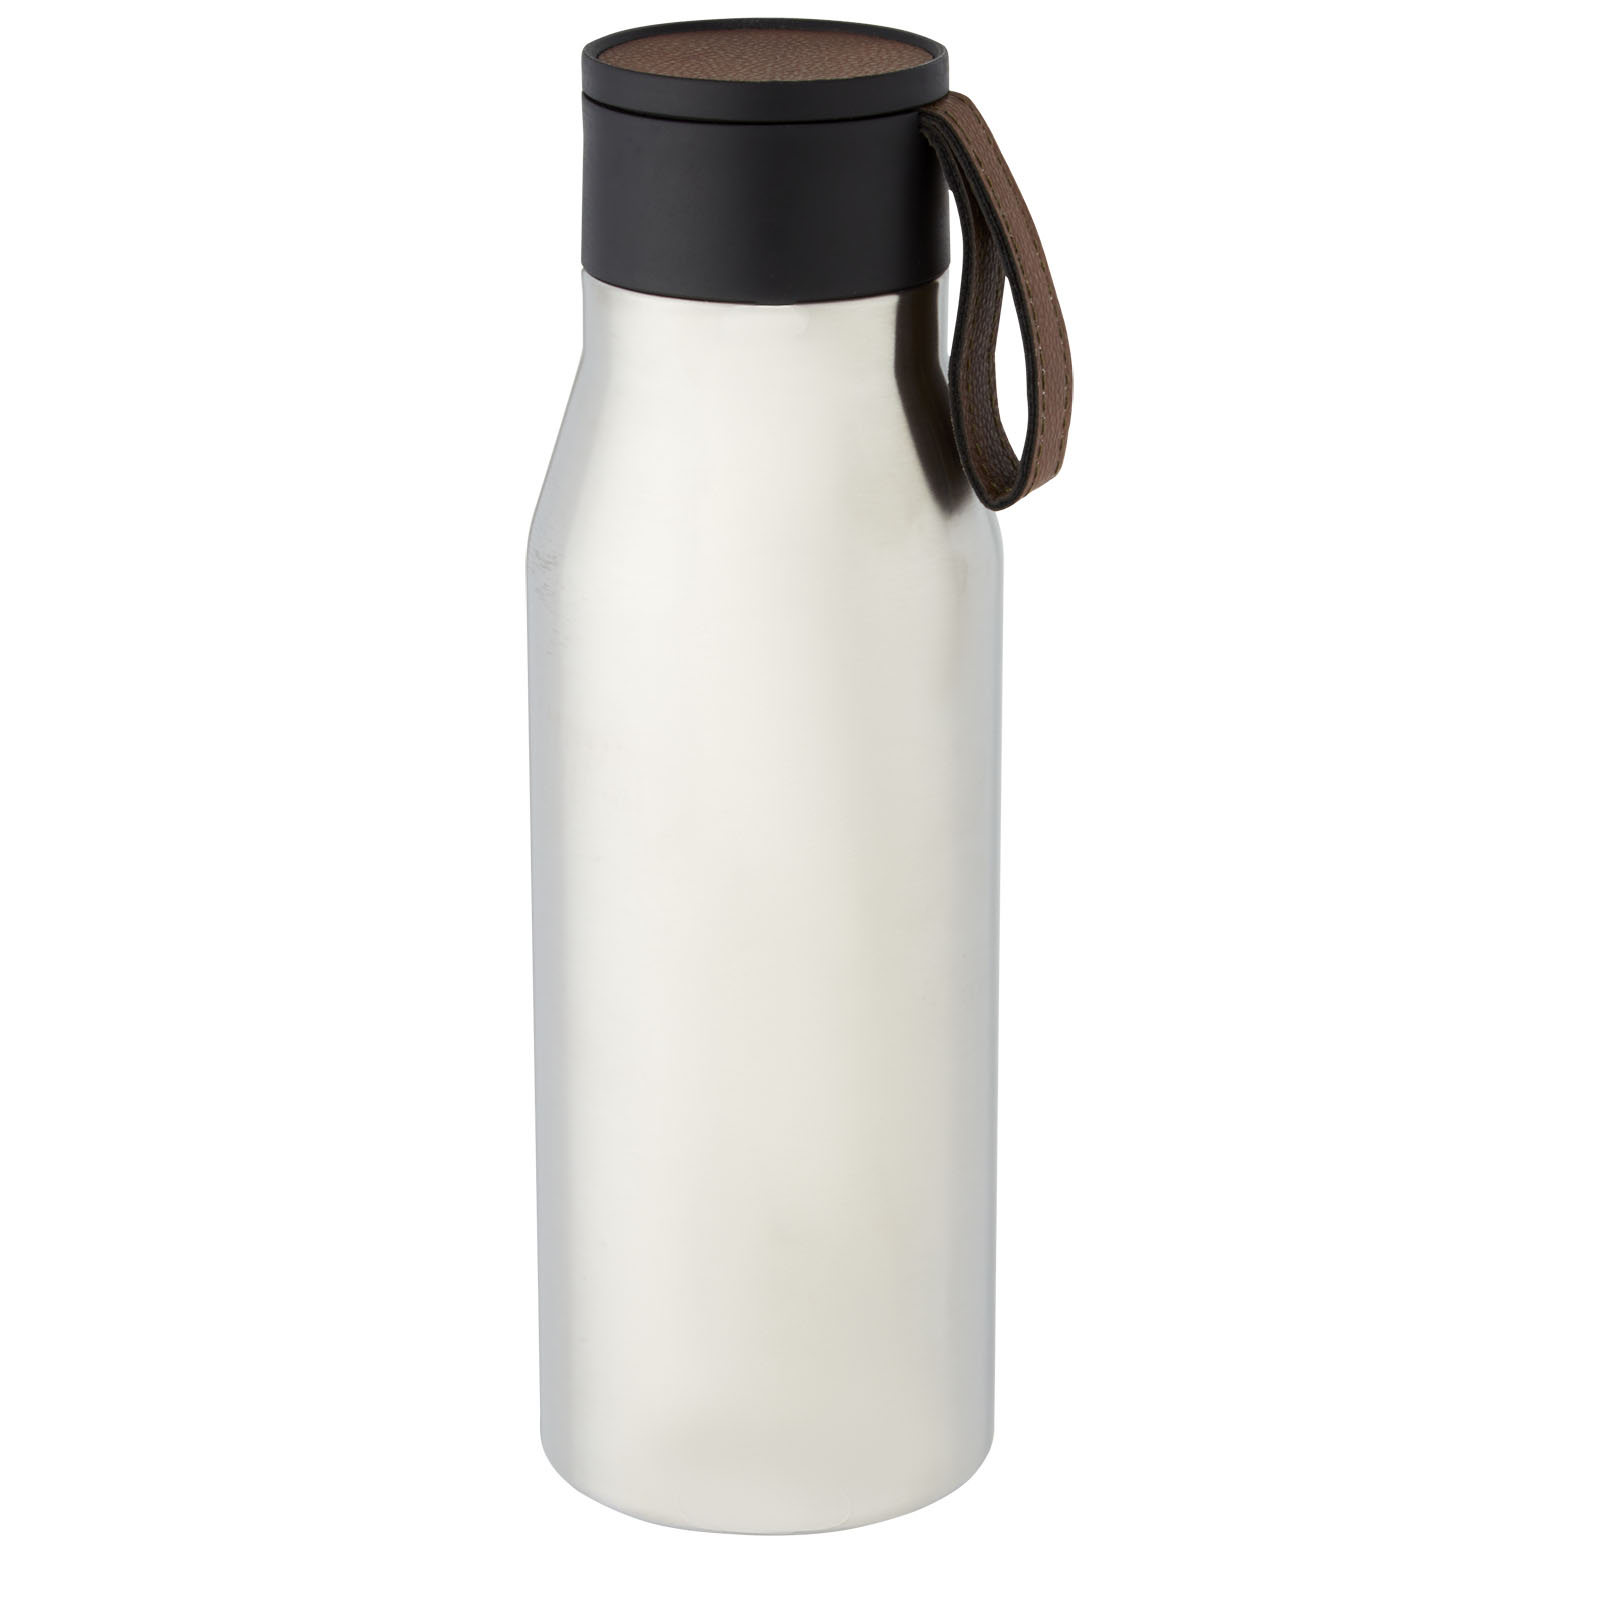 Advertising Insulated bottles - Ljungan 500 ml copper vacuum insulated stainless steel bottle with PU leather strap and lid - 5